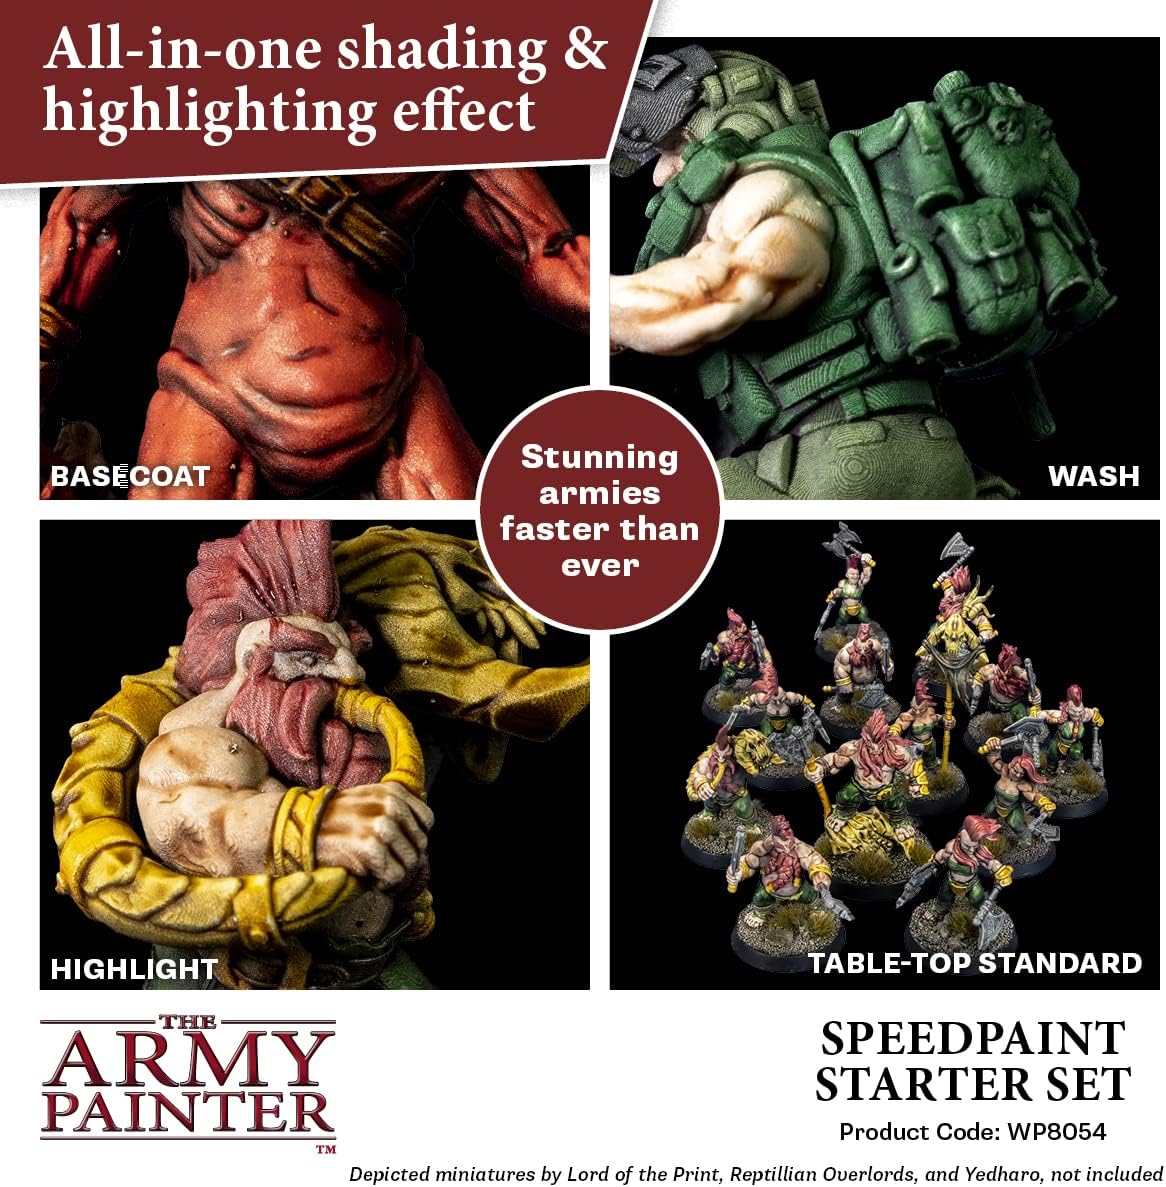 The Army Painter Speedpaint Starter Set - 10x18ml Speed Model Paint Kit Pre Loaded with Mixing Balls and 1 Brush- Base, Shadow and Highlight in One Miniature and Model Paint Set for Plastic Models